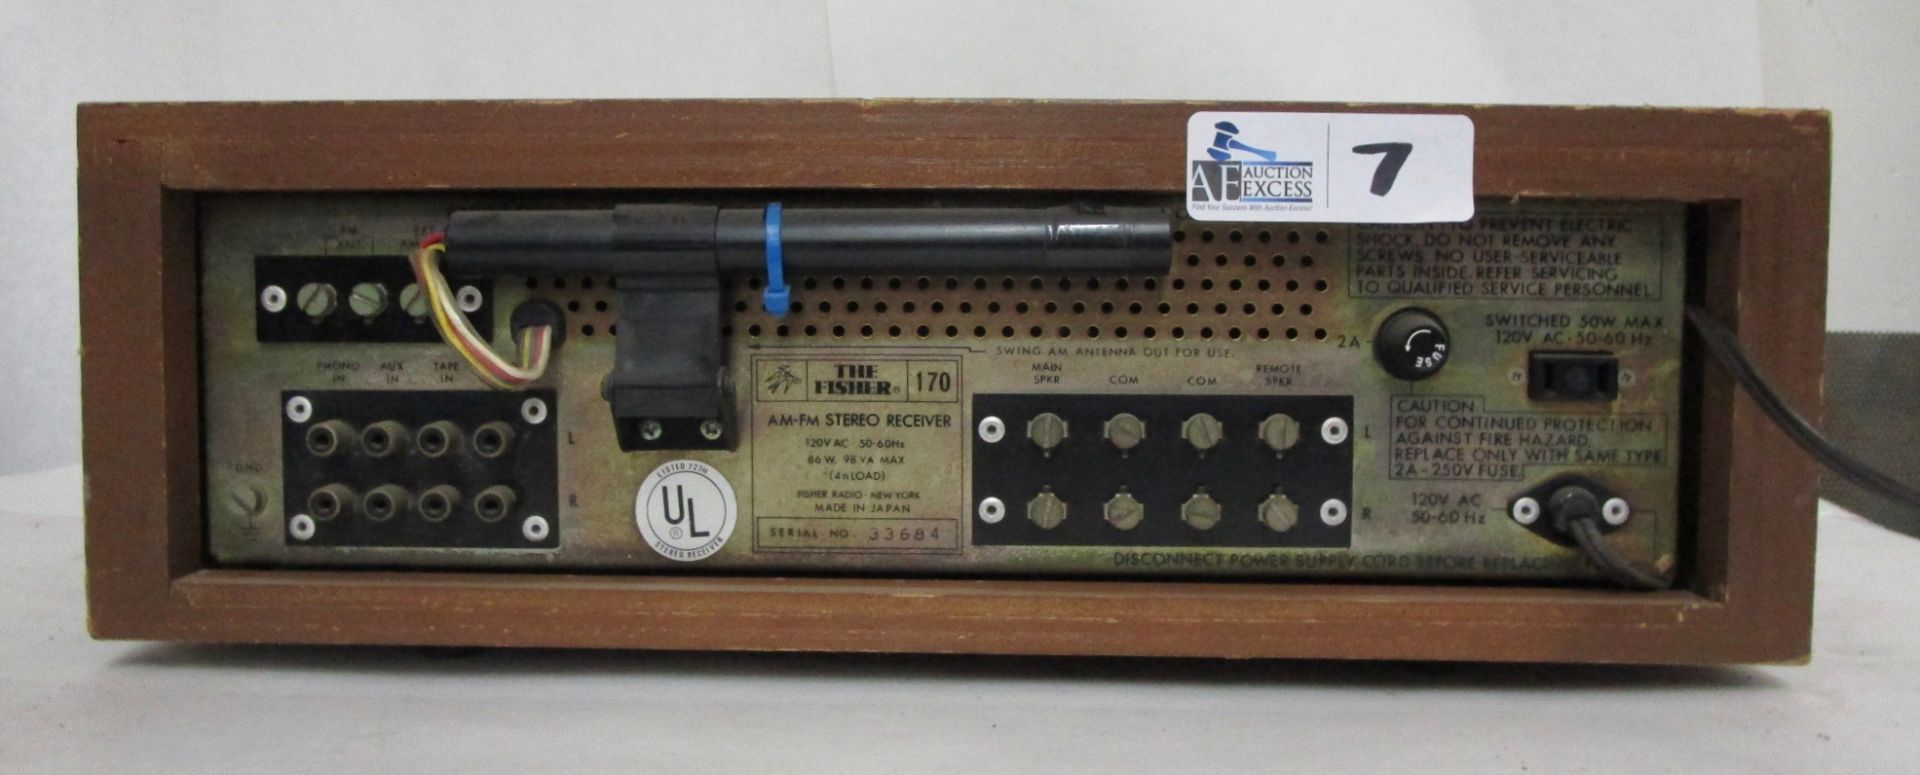 FISHER 170 RECEIVER - Image 2 of 2